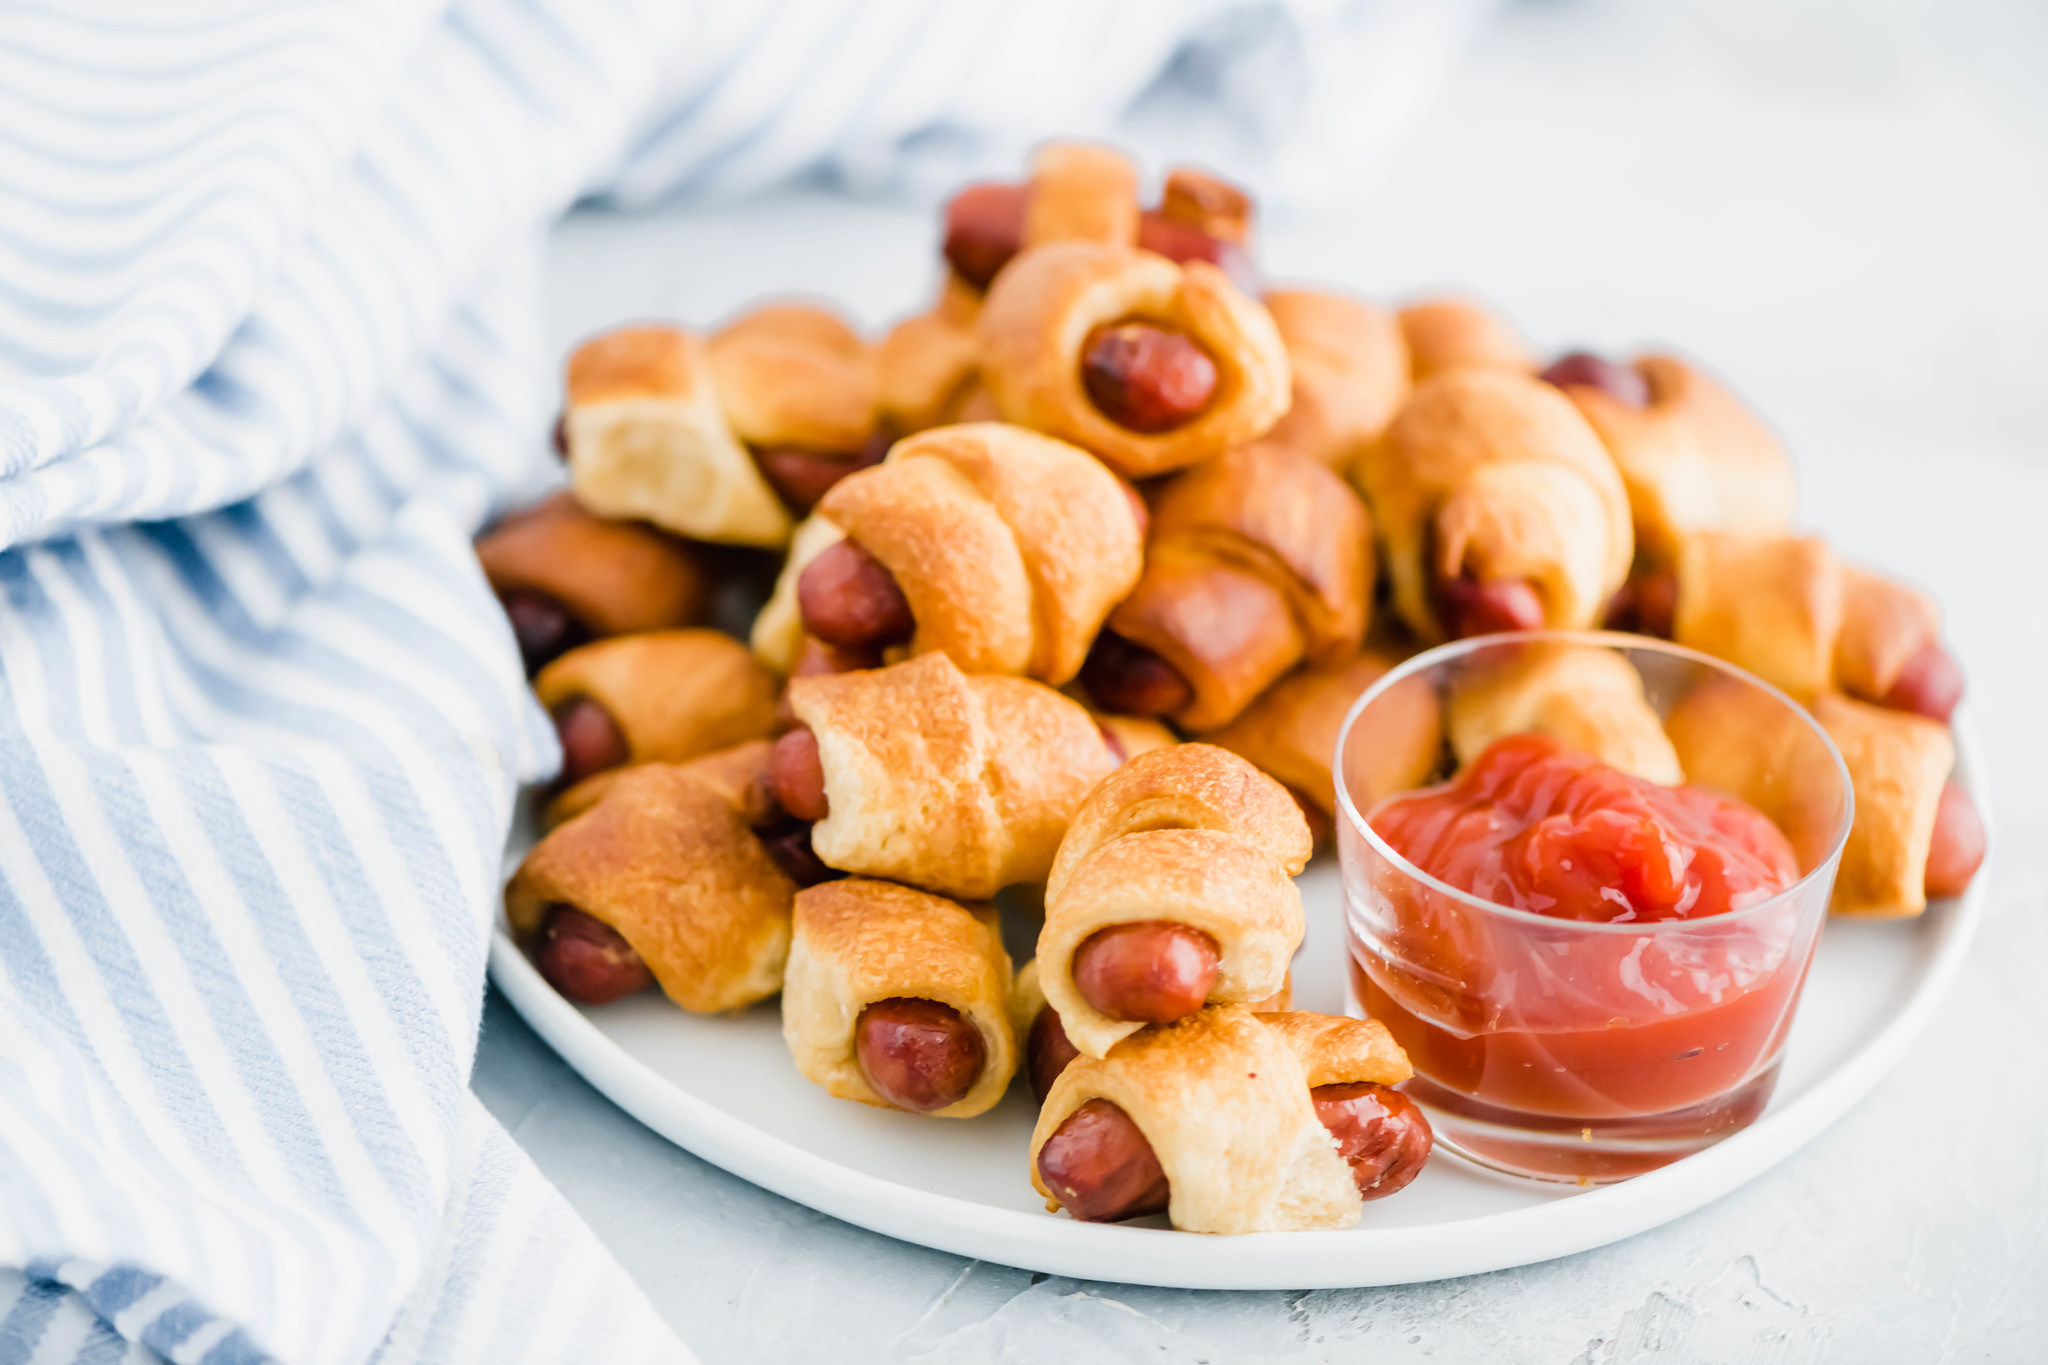 Pile of pigs in a blanket on a white round plate with a glass bowl of ketchup.